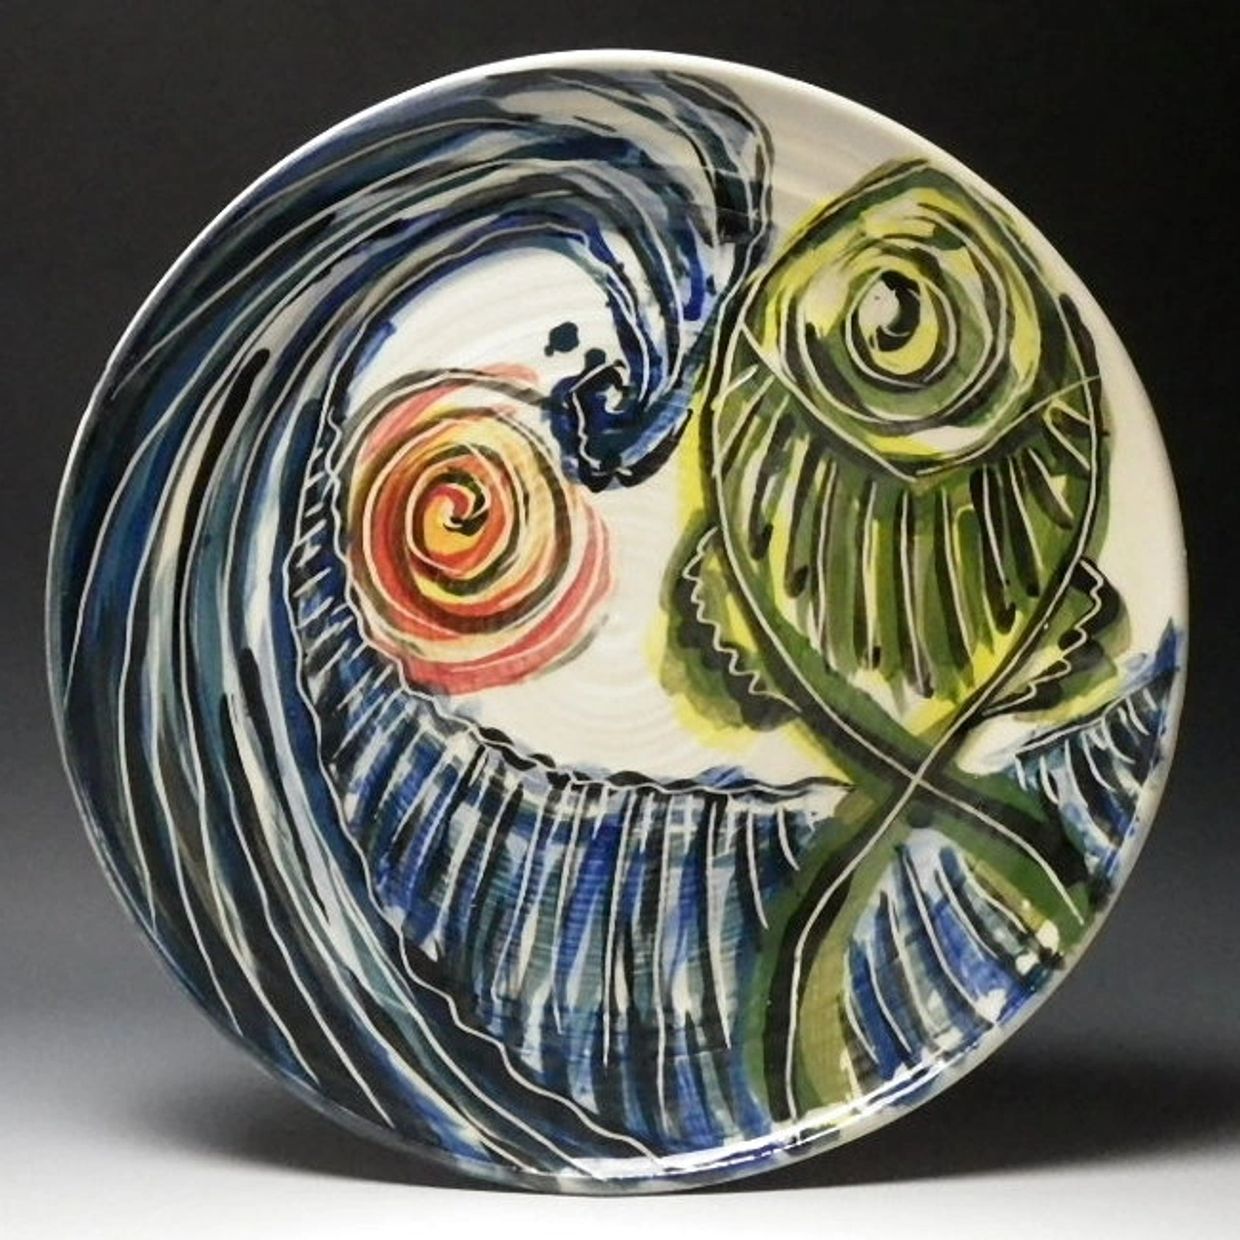 Handmade porcelain dinner plate with a huge blue wave, orange sun, and green fish painted on it